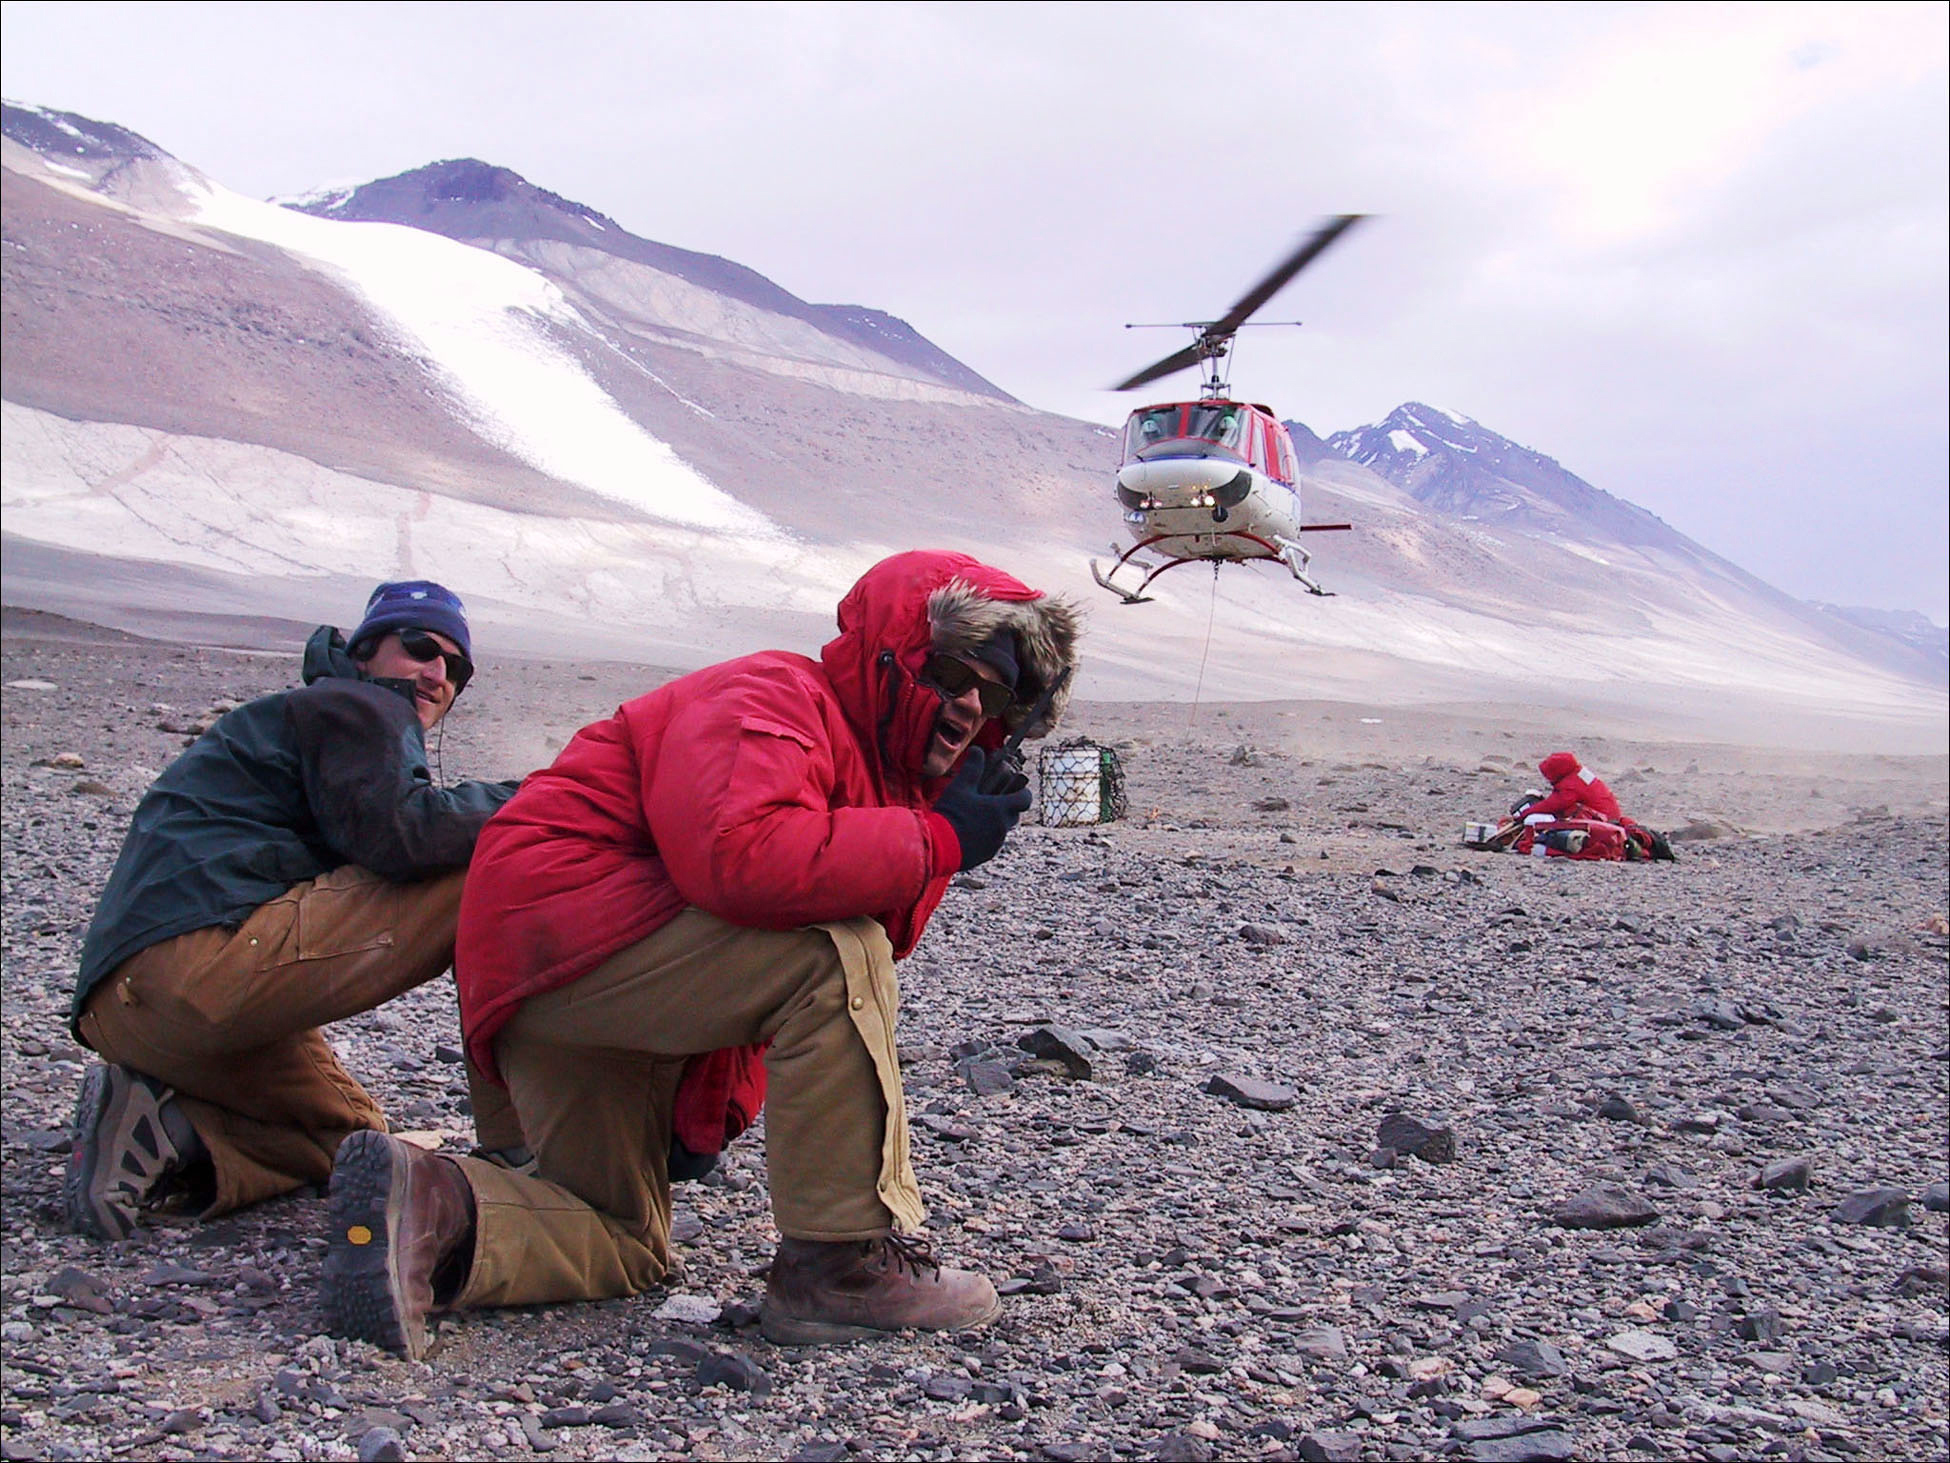 Two men crouch to the ground as a helicopter lands nearby.